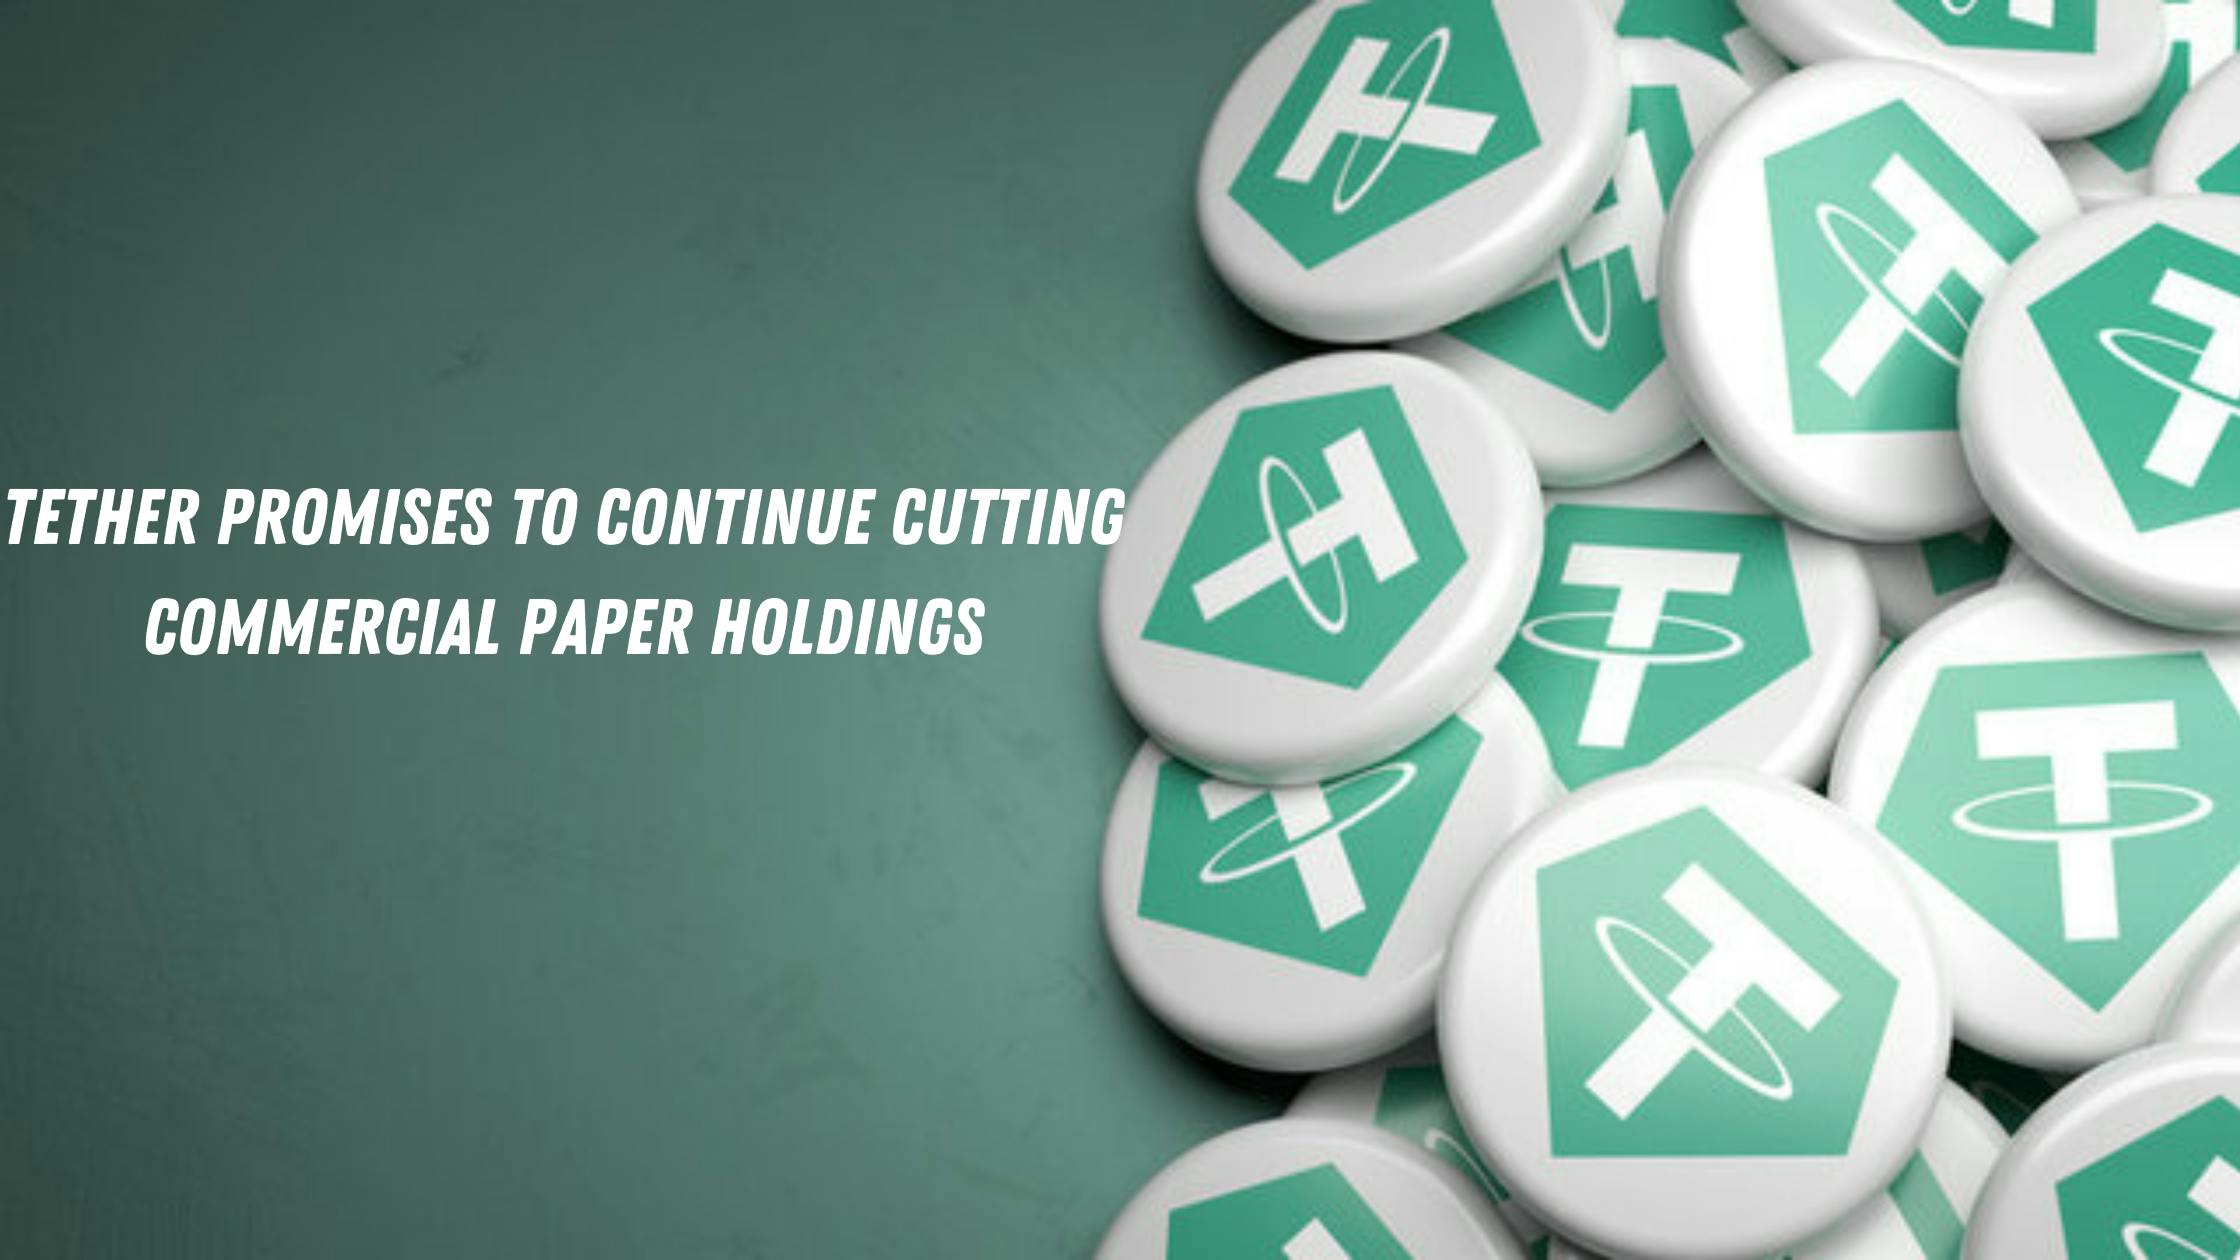 Tether Promises to Continue Cutting Commercial Paper Holdings